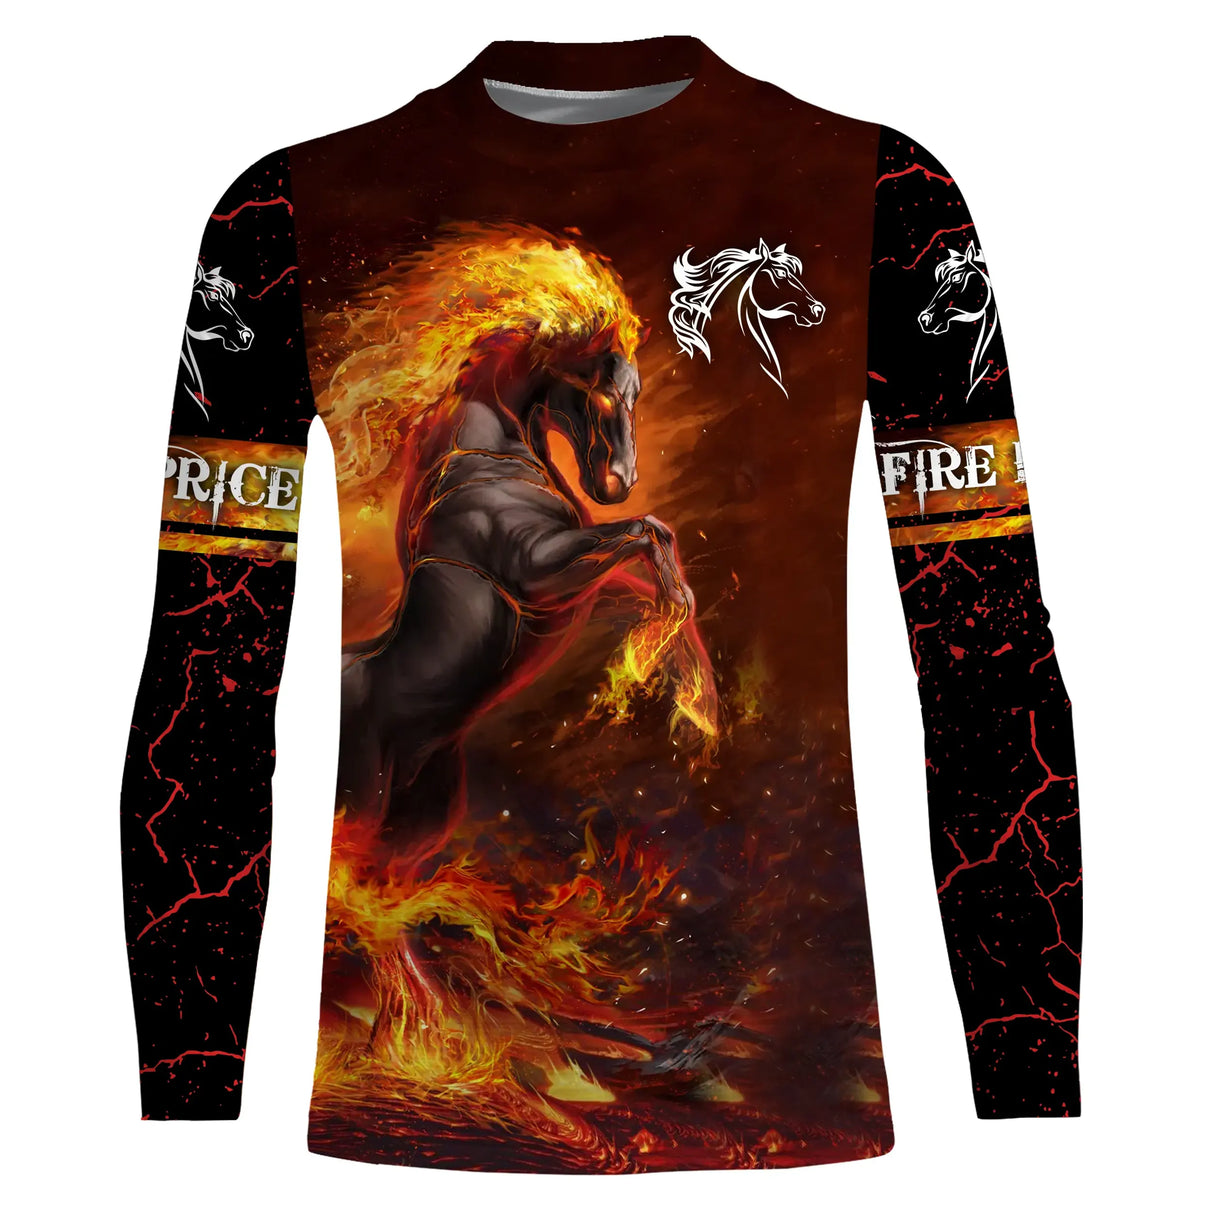 Chiptshirts Fire Horses T-Shirt - Personalized Gift for Horse Lover, Horse Fan - CTS18062215